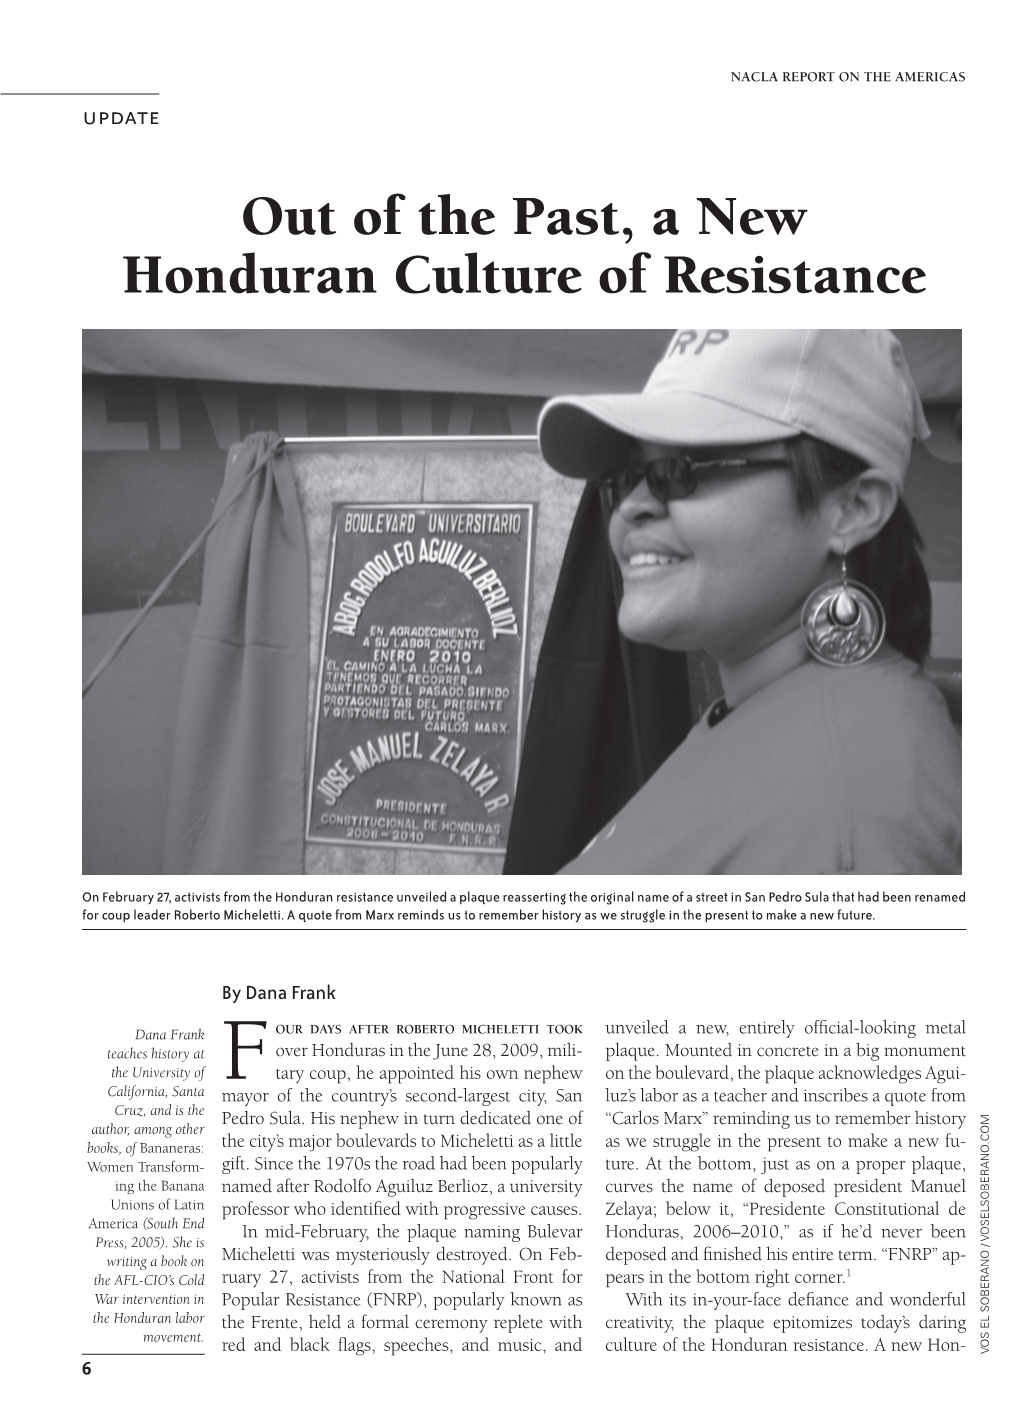 Out of the Past, a New Honduran Culture of Resistance